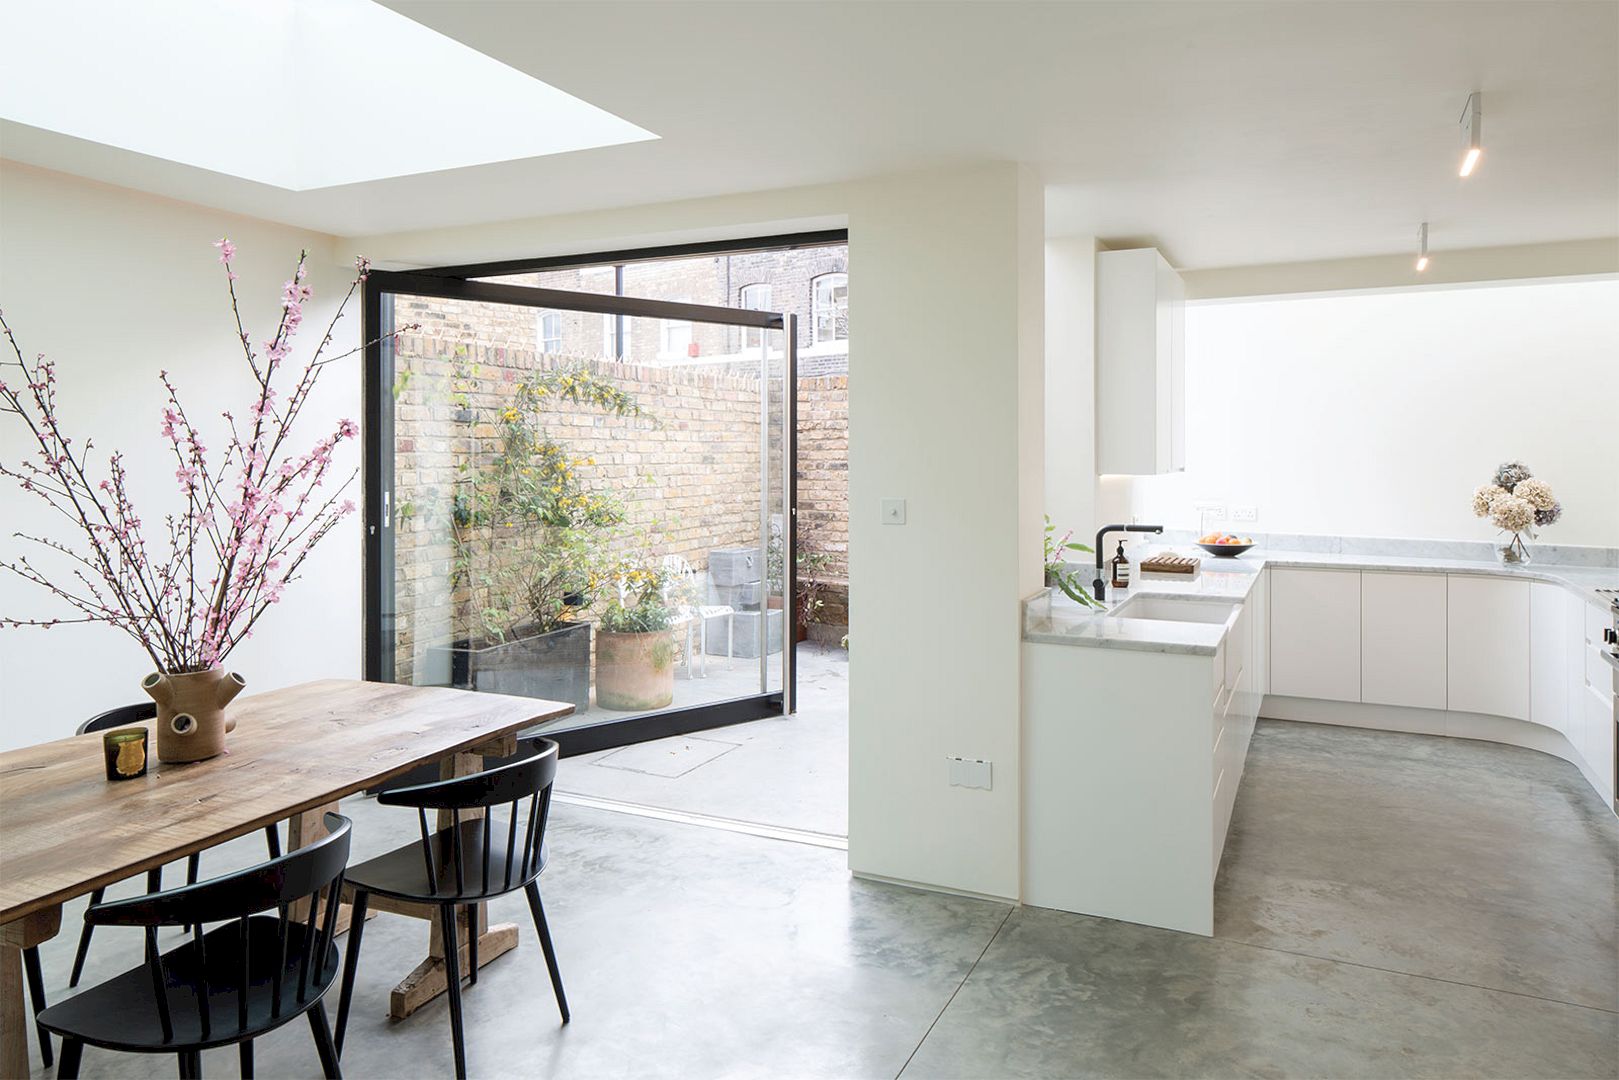 Columbia Road House: A Ground-Floor Rear Extension to Maximize Light and Space